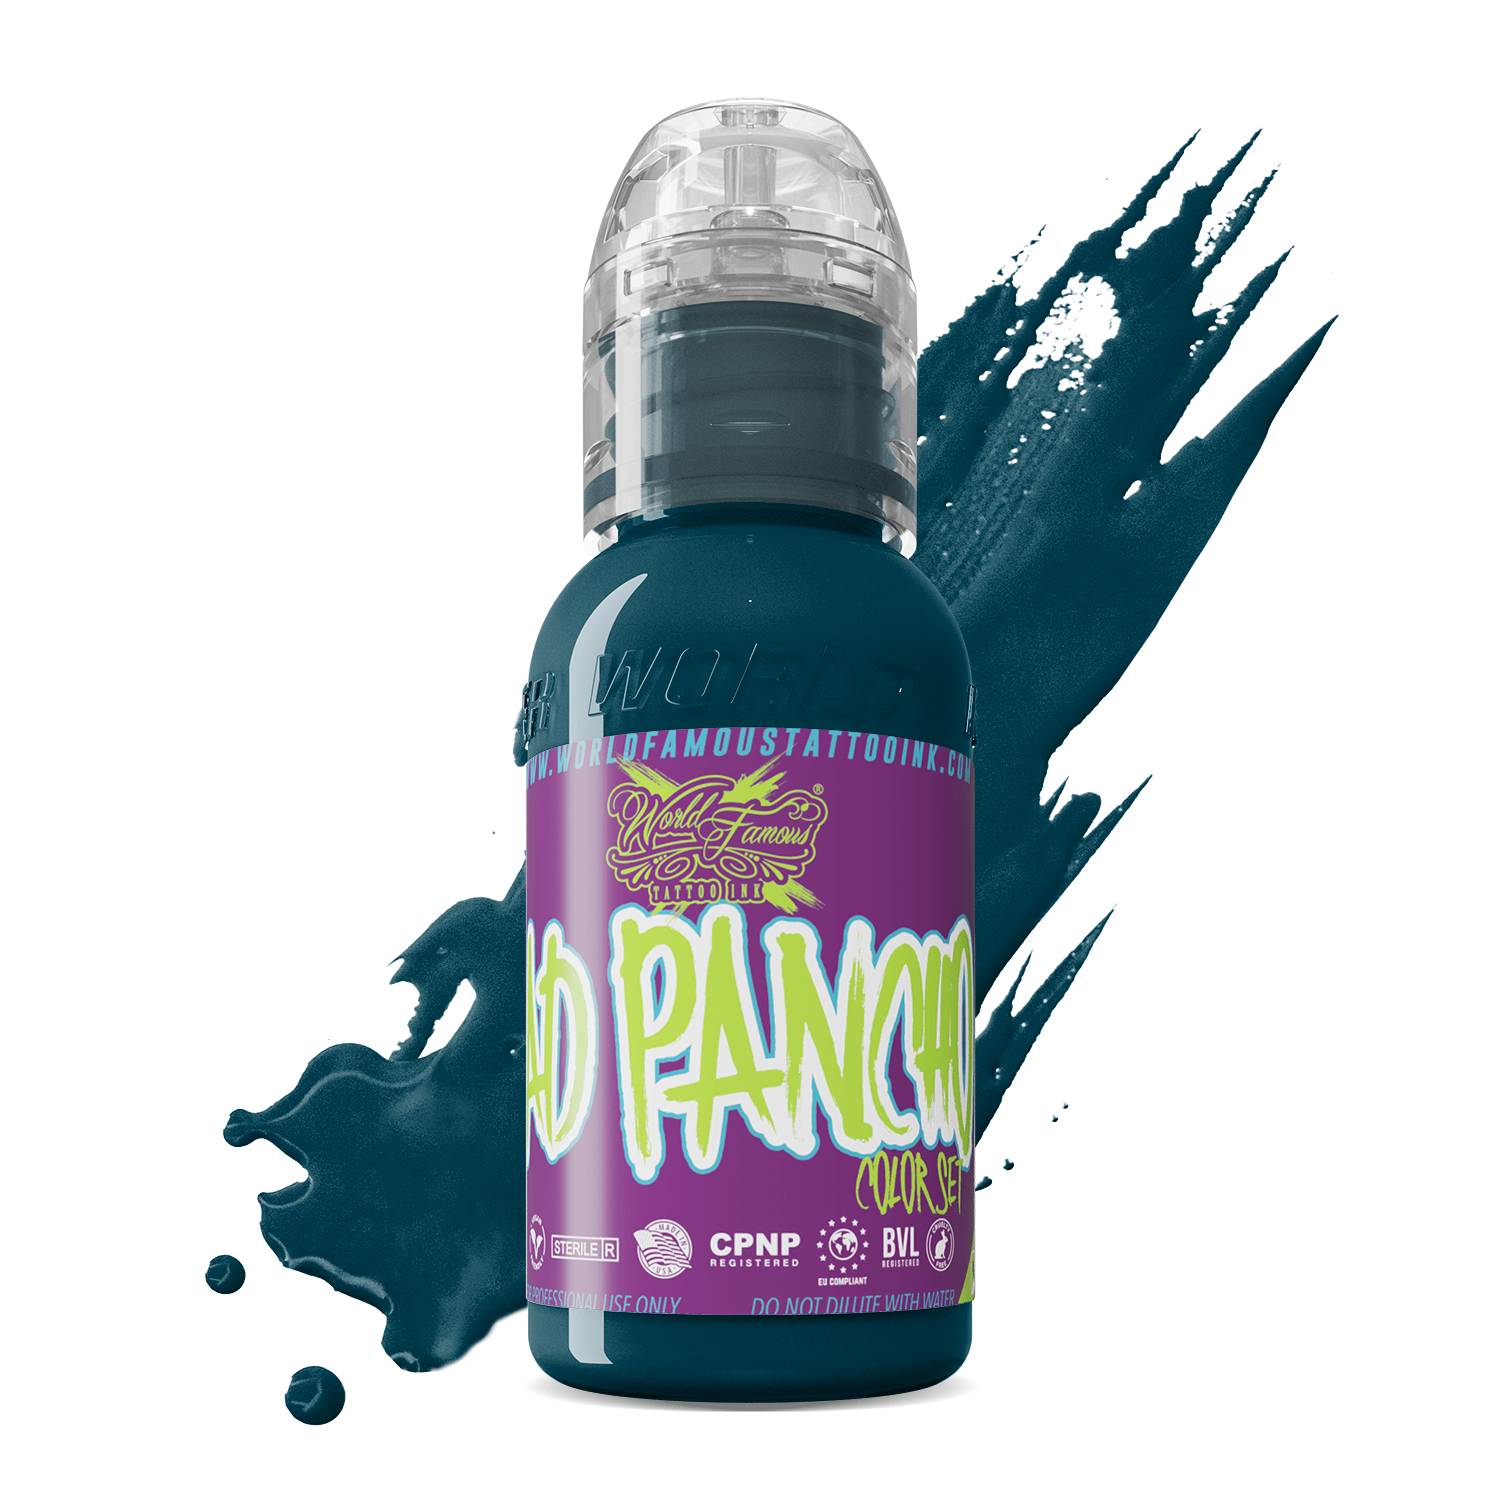 A.D. Pancho Proteam Color - Blue | World Famous Tattoo Ink